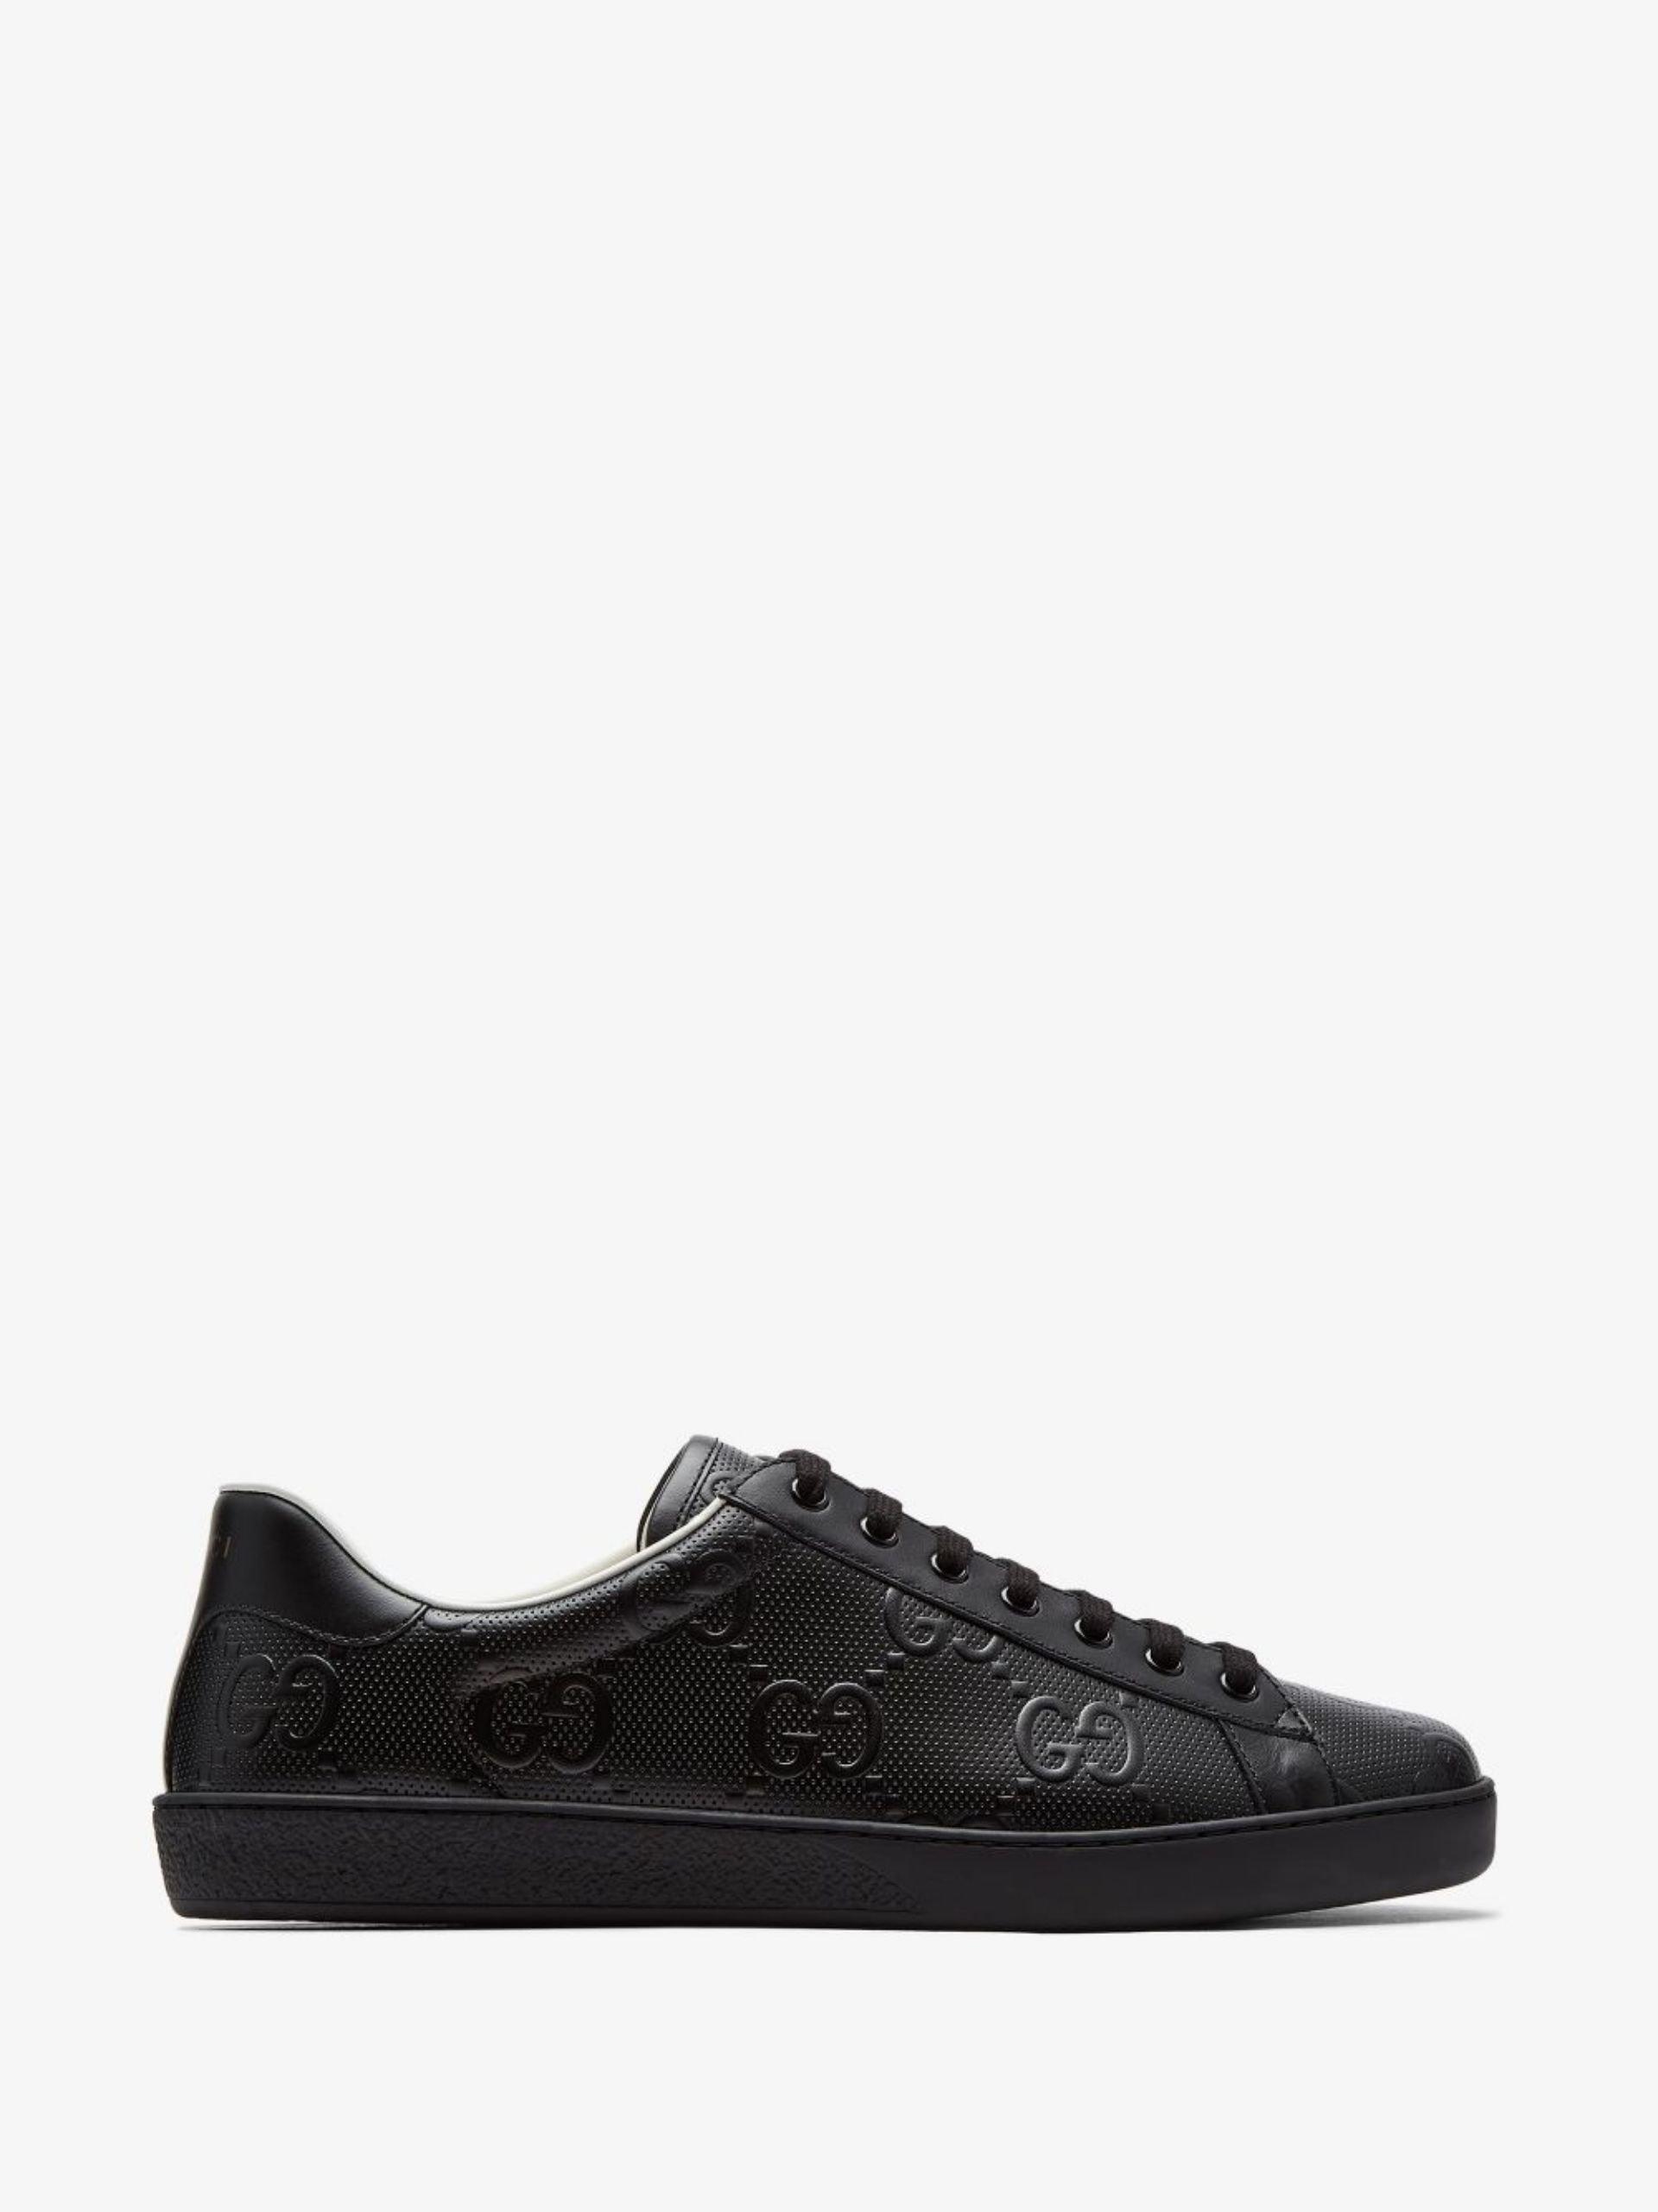 Gucci Ace gg Supreme Sneakers in Black for Men | Lyst